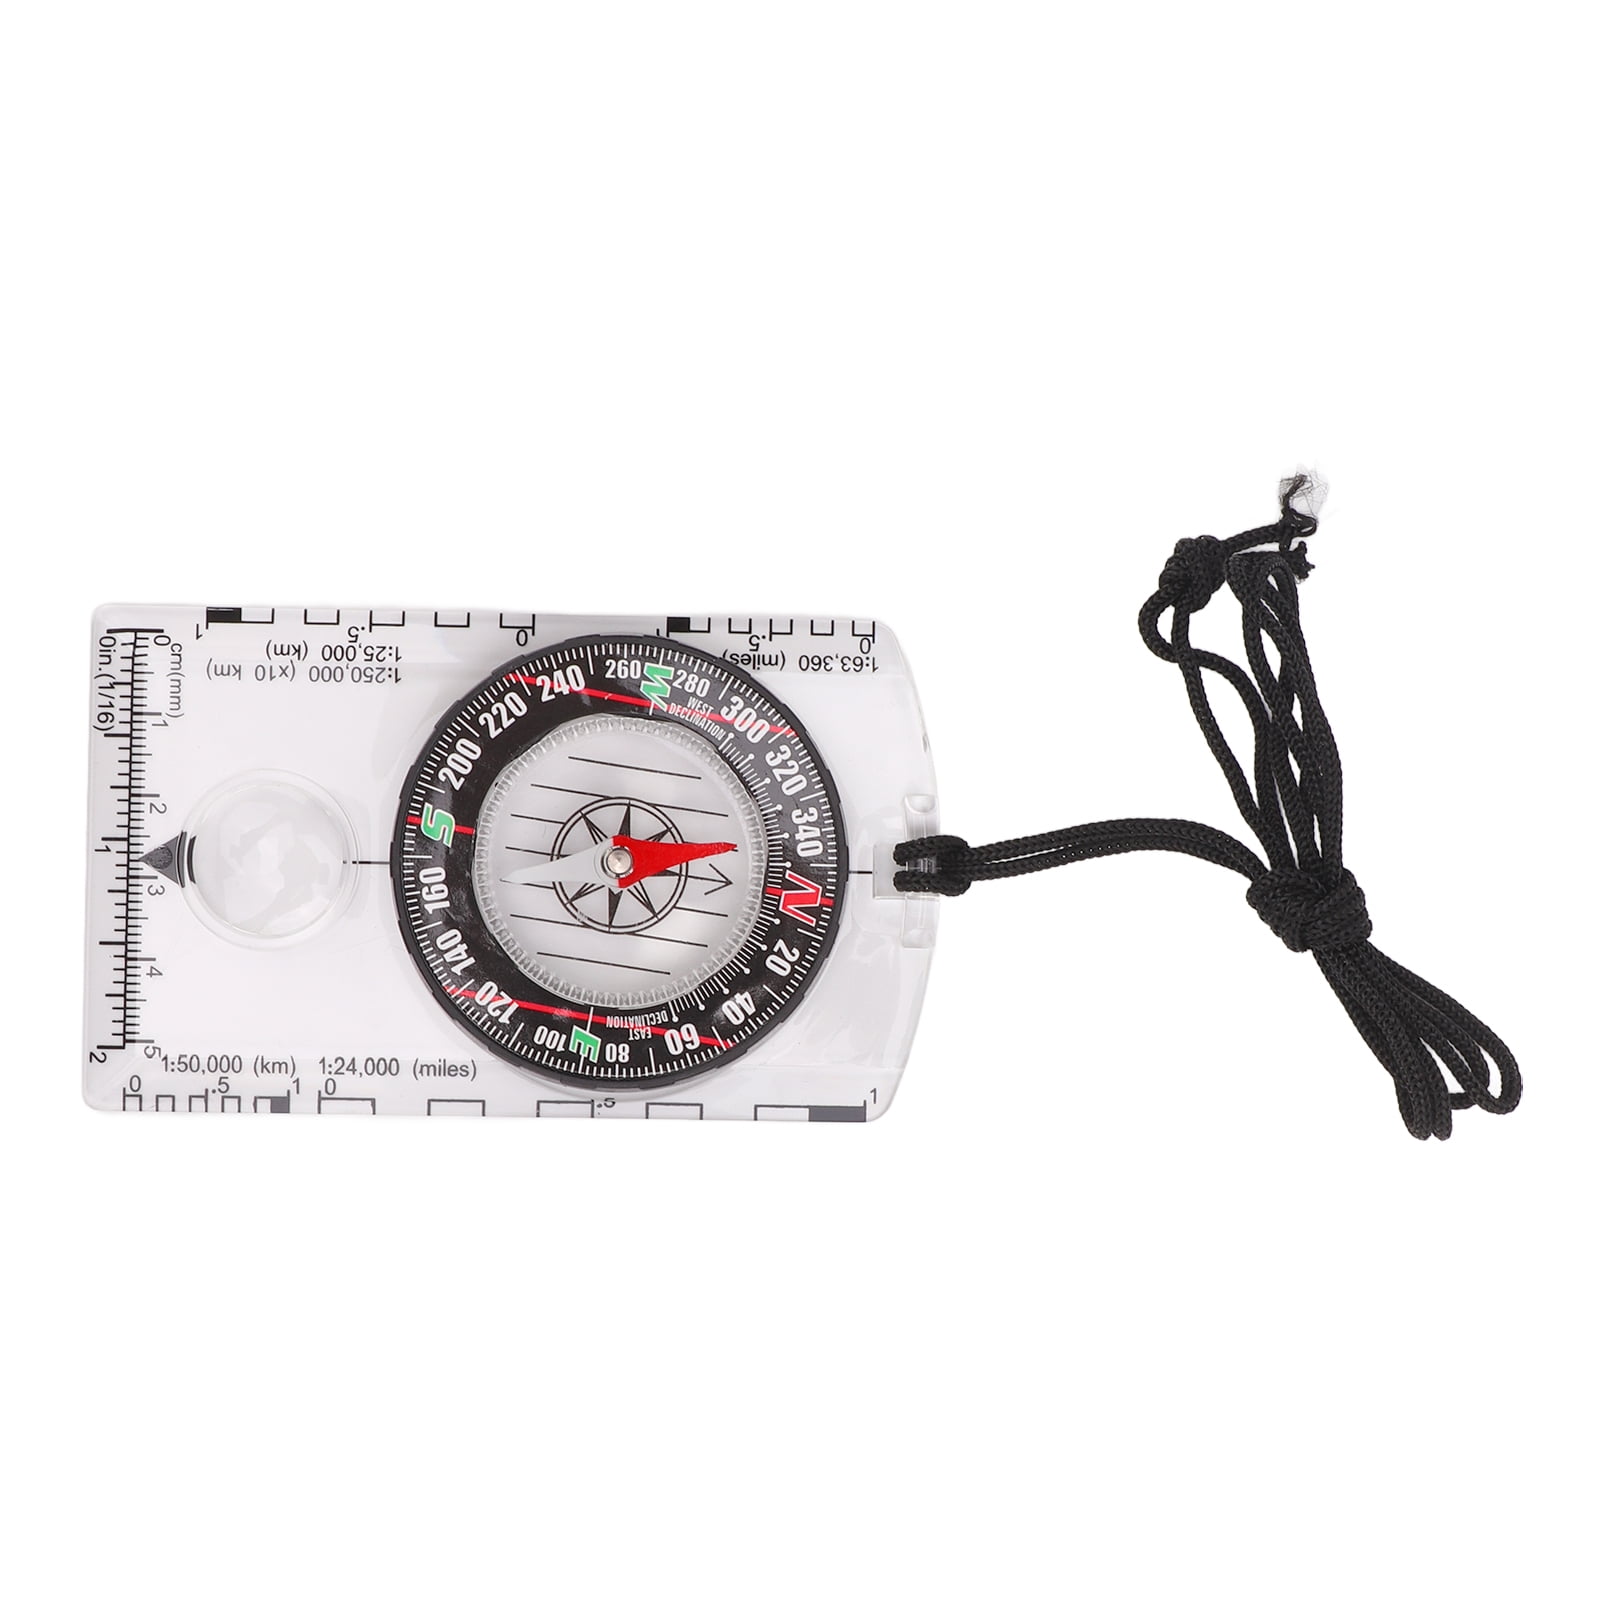 AceCamp Mirror Compass Outdoor Premium Portable Map Compass Navigation Tools for Camping Hiking 